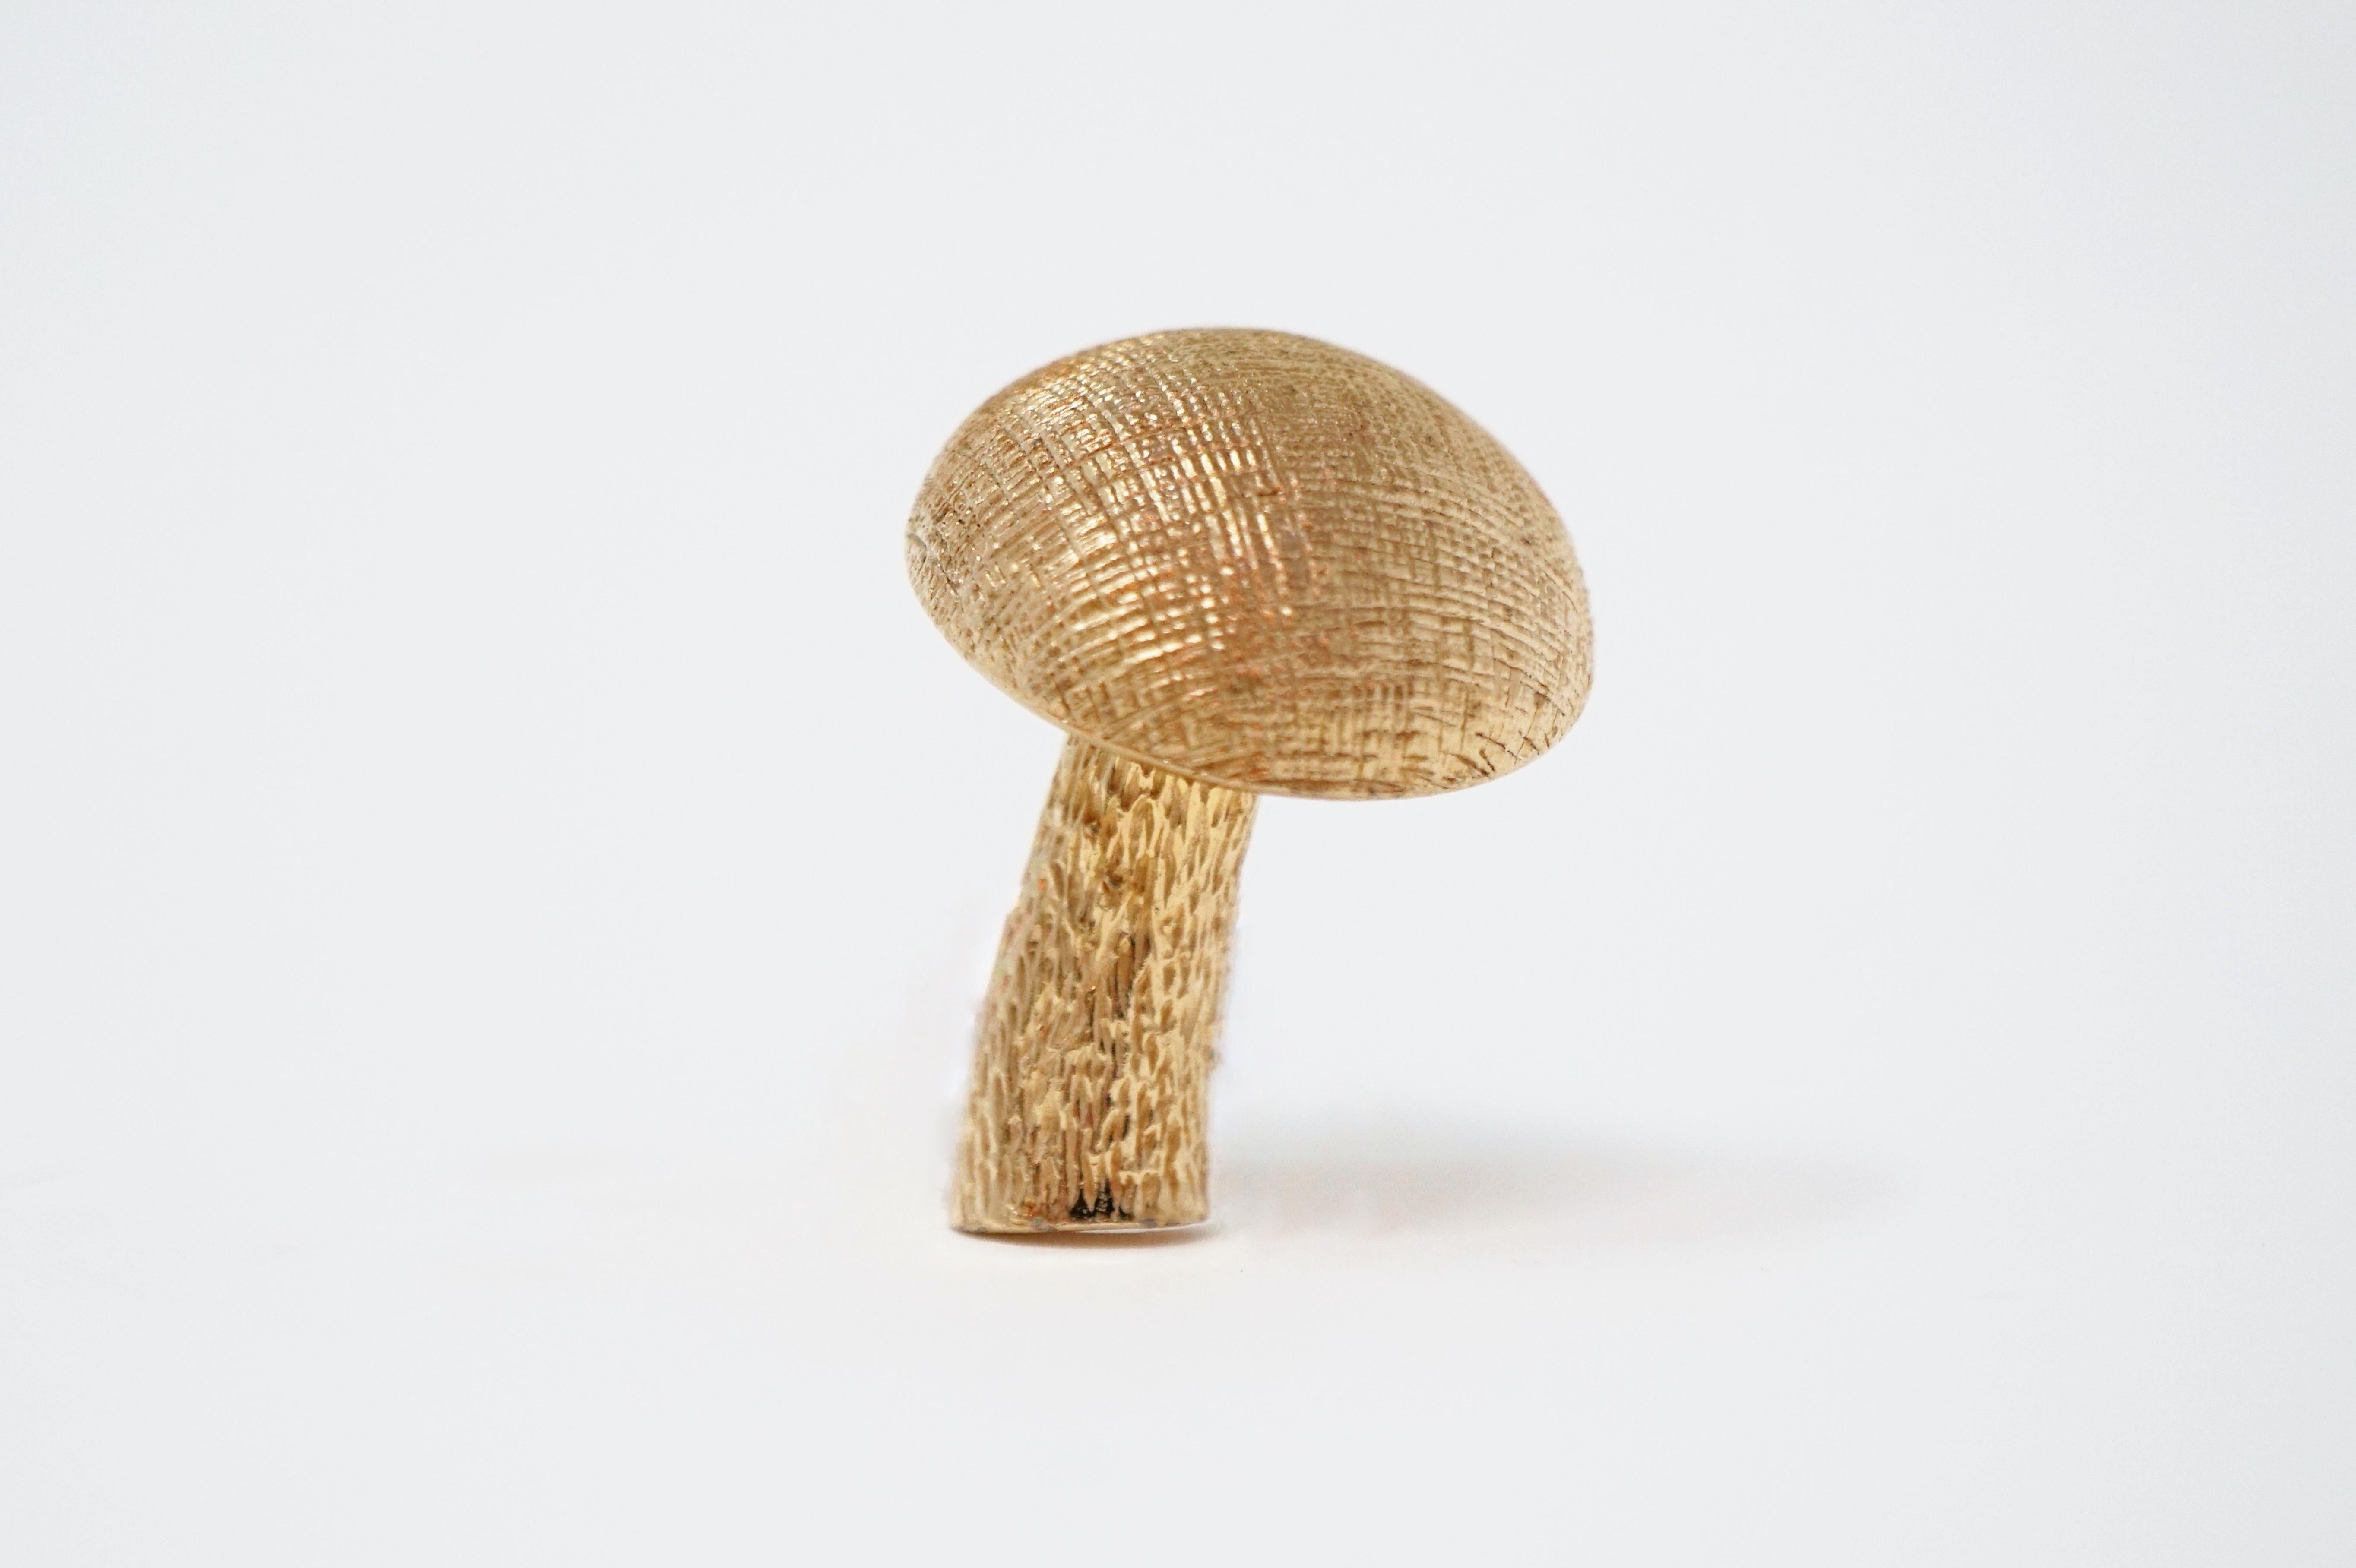 This rare and adorable mushroom brooch by iconic costume jewelry brand, Castlecliff, is a wonderfully whimsical treasure from the 1950s!  The brushed mushroom cap and textured stem are covered in gold-plating, with the piece standing at about one